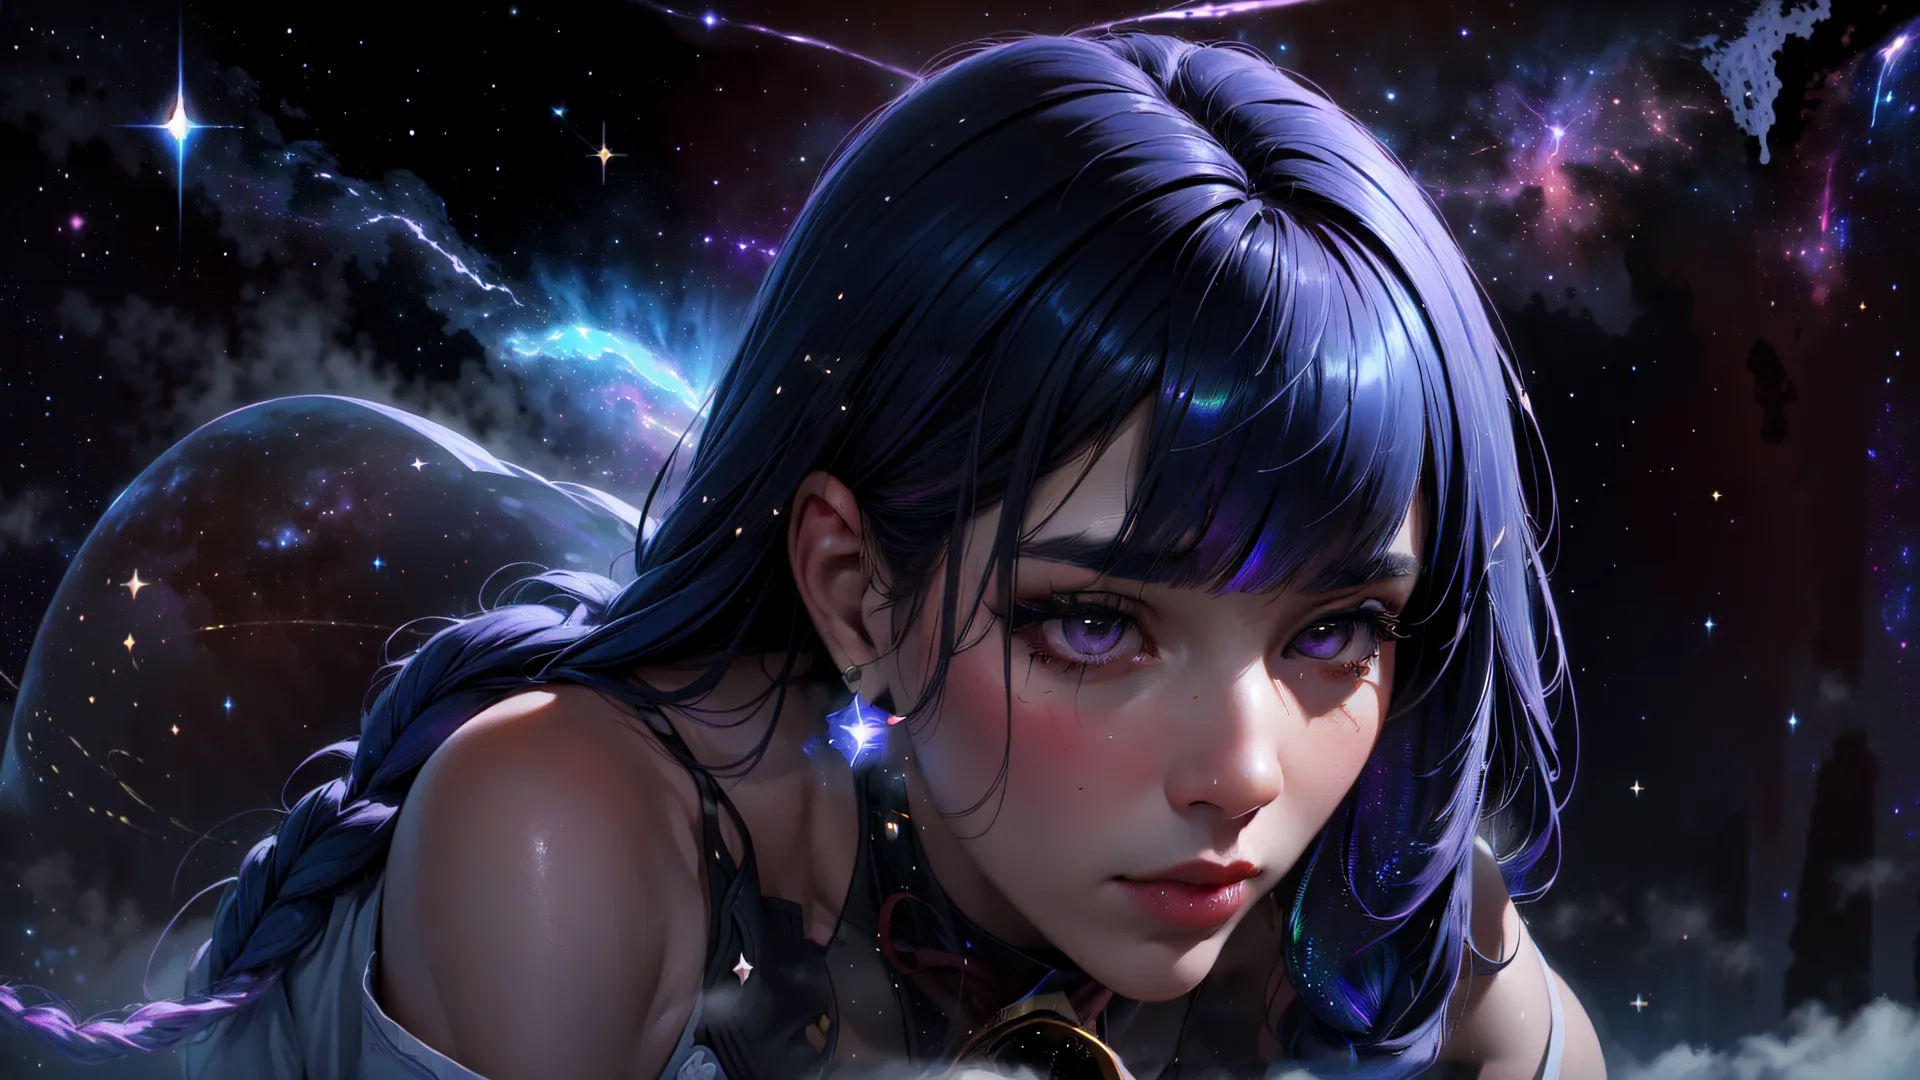 a girl sitting in the snow holding onto an open box of gold bars and stars on the background with some night city lights also visible above her
